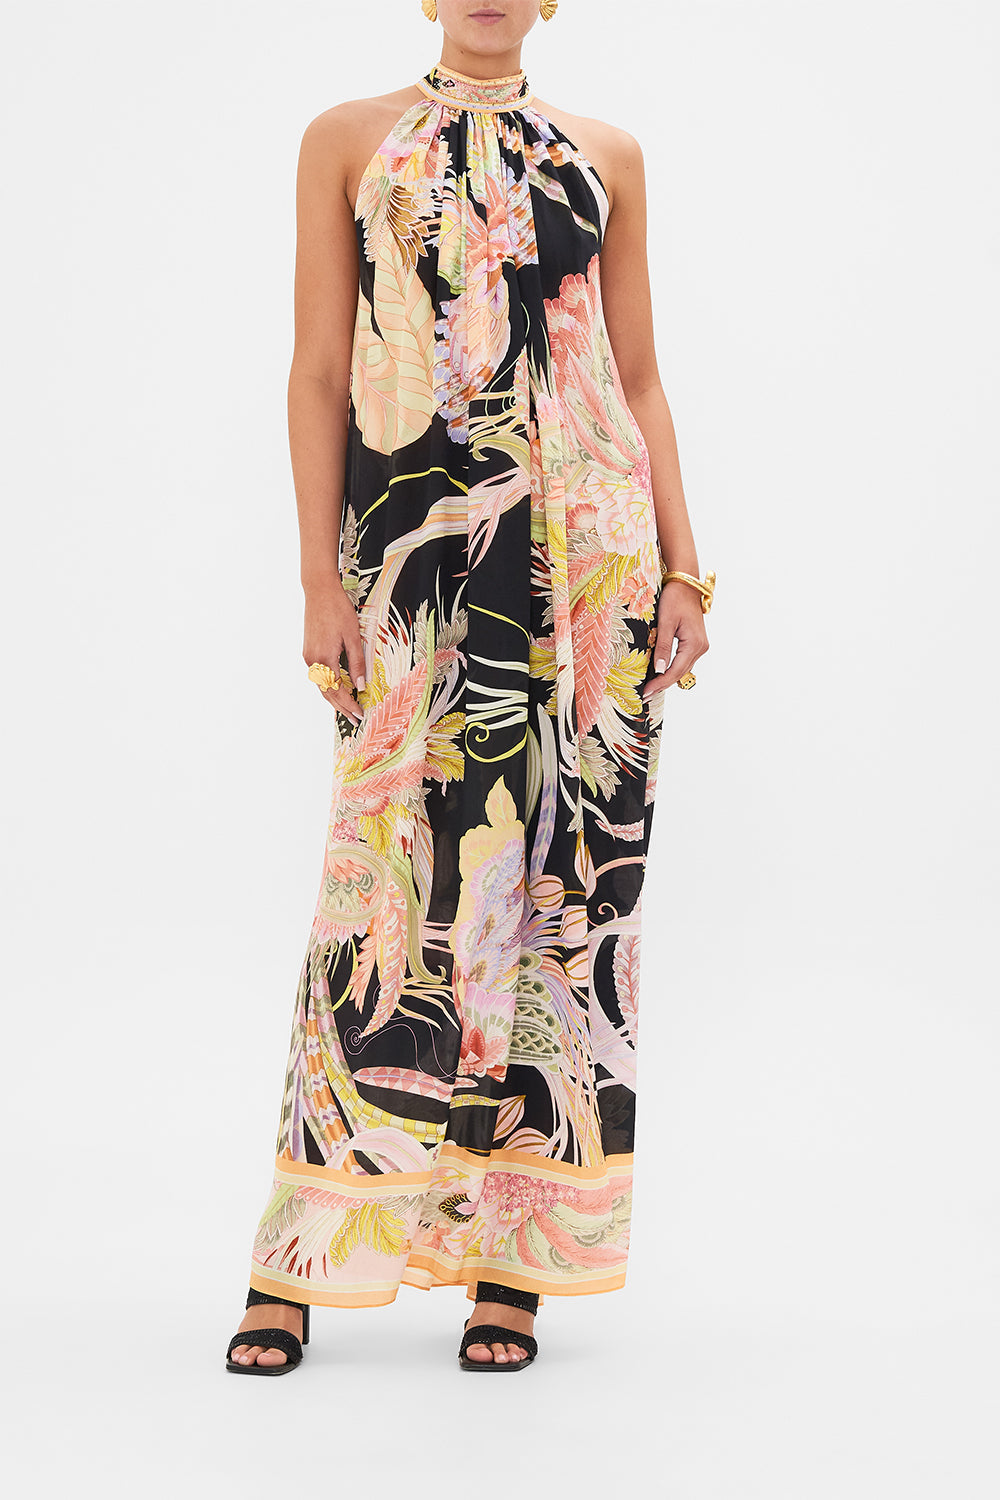 Front view of model wearing CAMILLA silk floral maxi dress in Lady of The Moon print